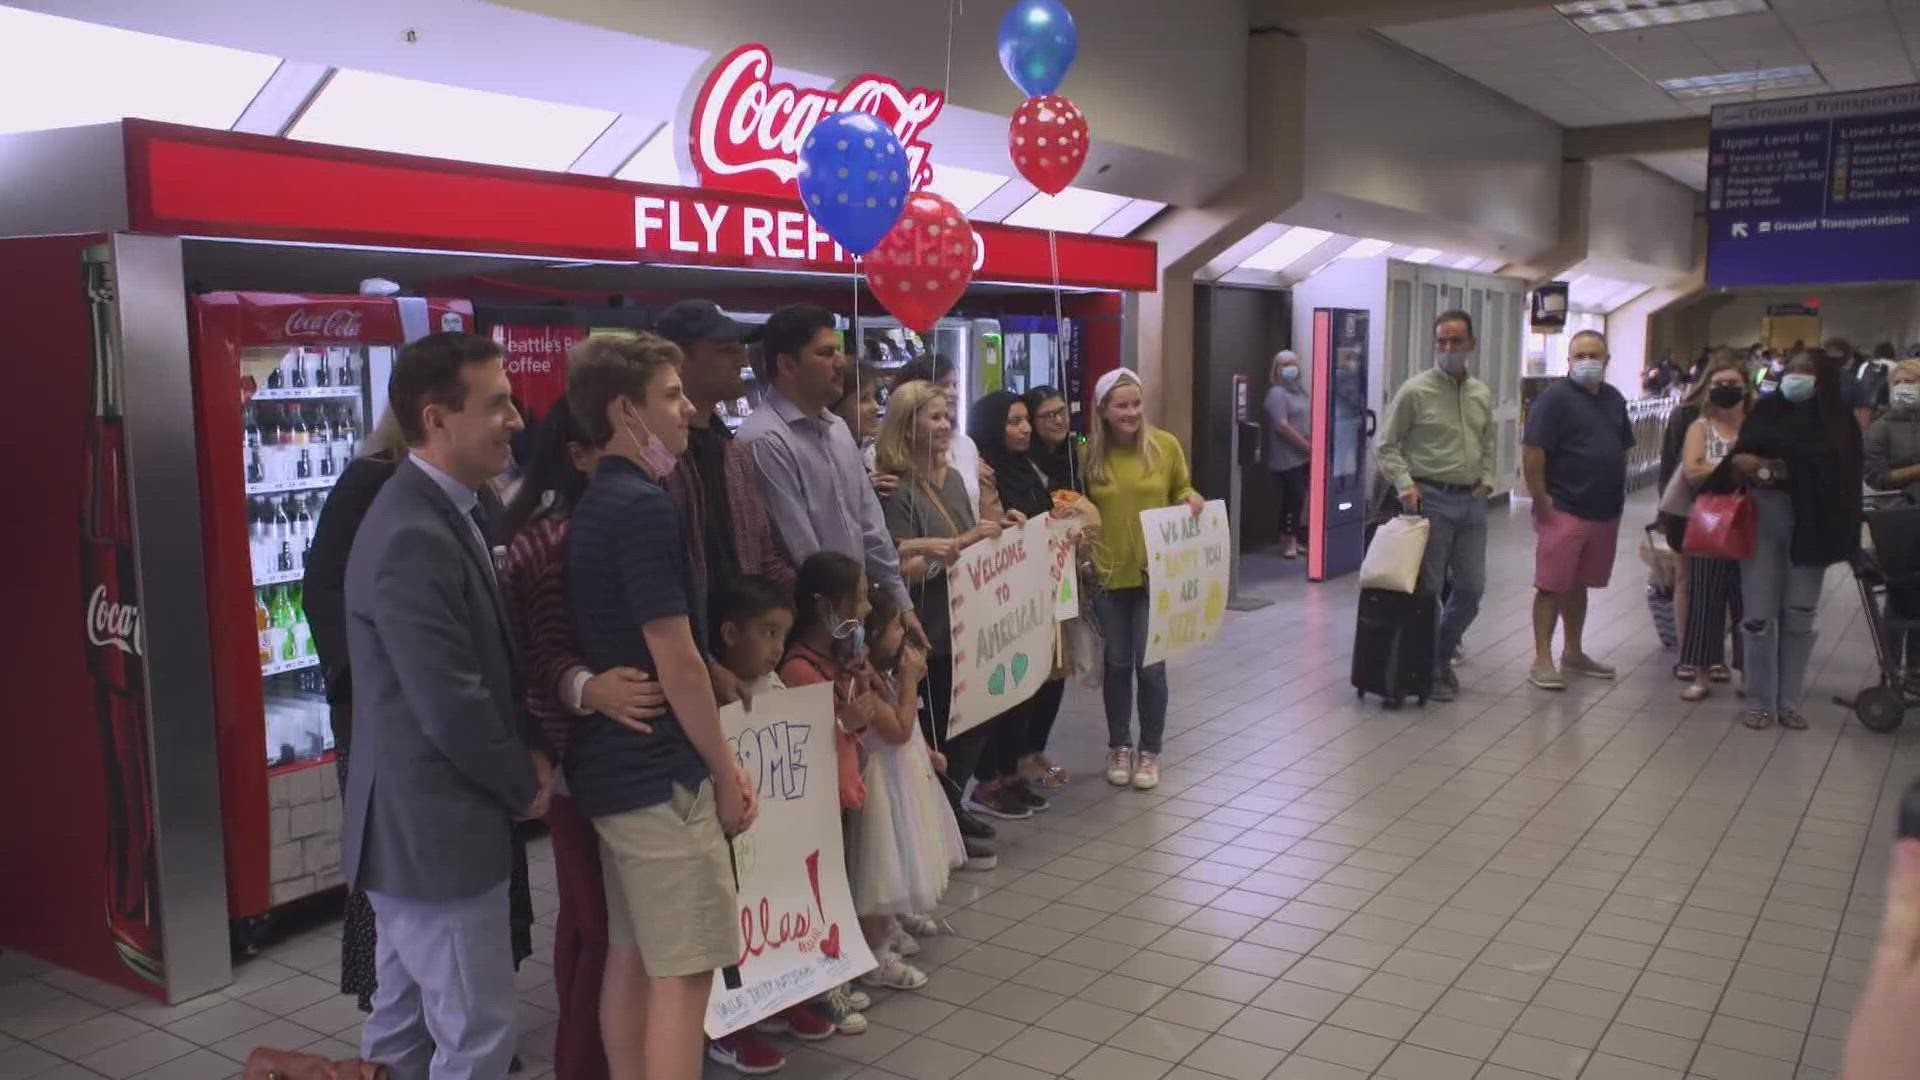 A family who made a harrowing escape from Afghanistan was met with a warm welcome at DFW Airport on Sunday.